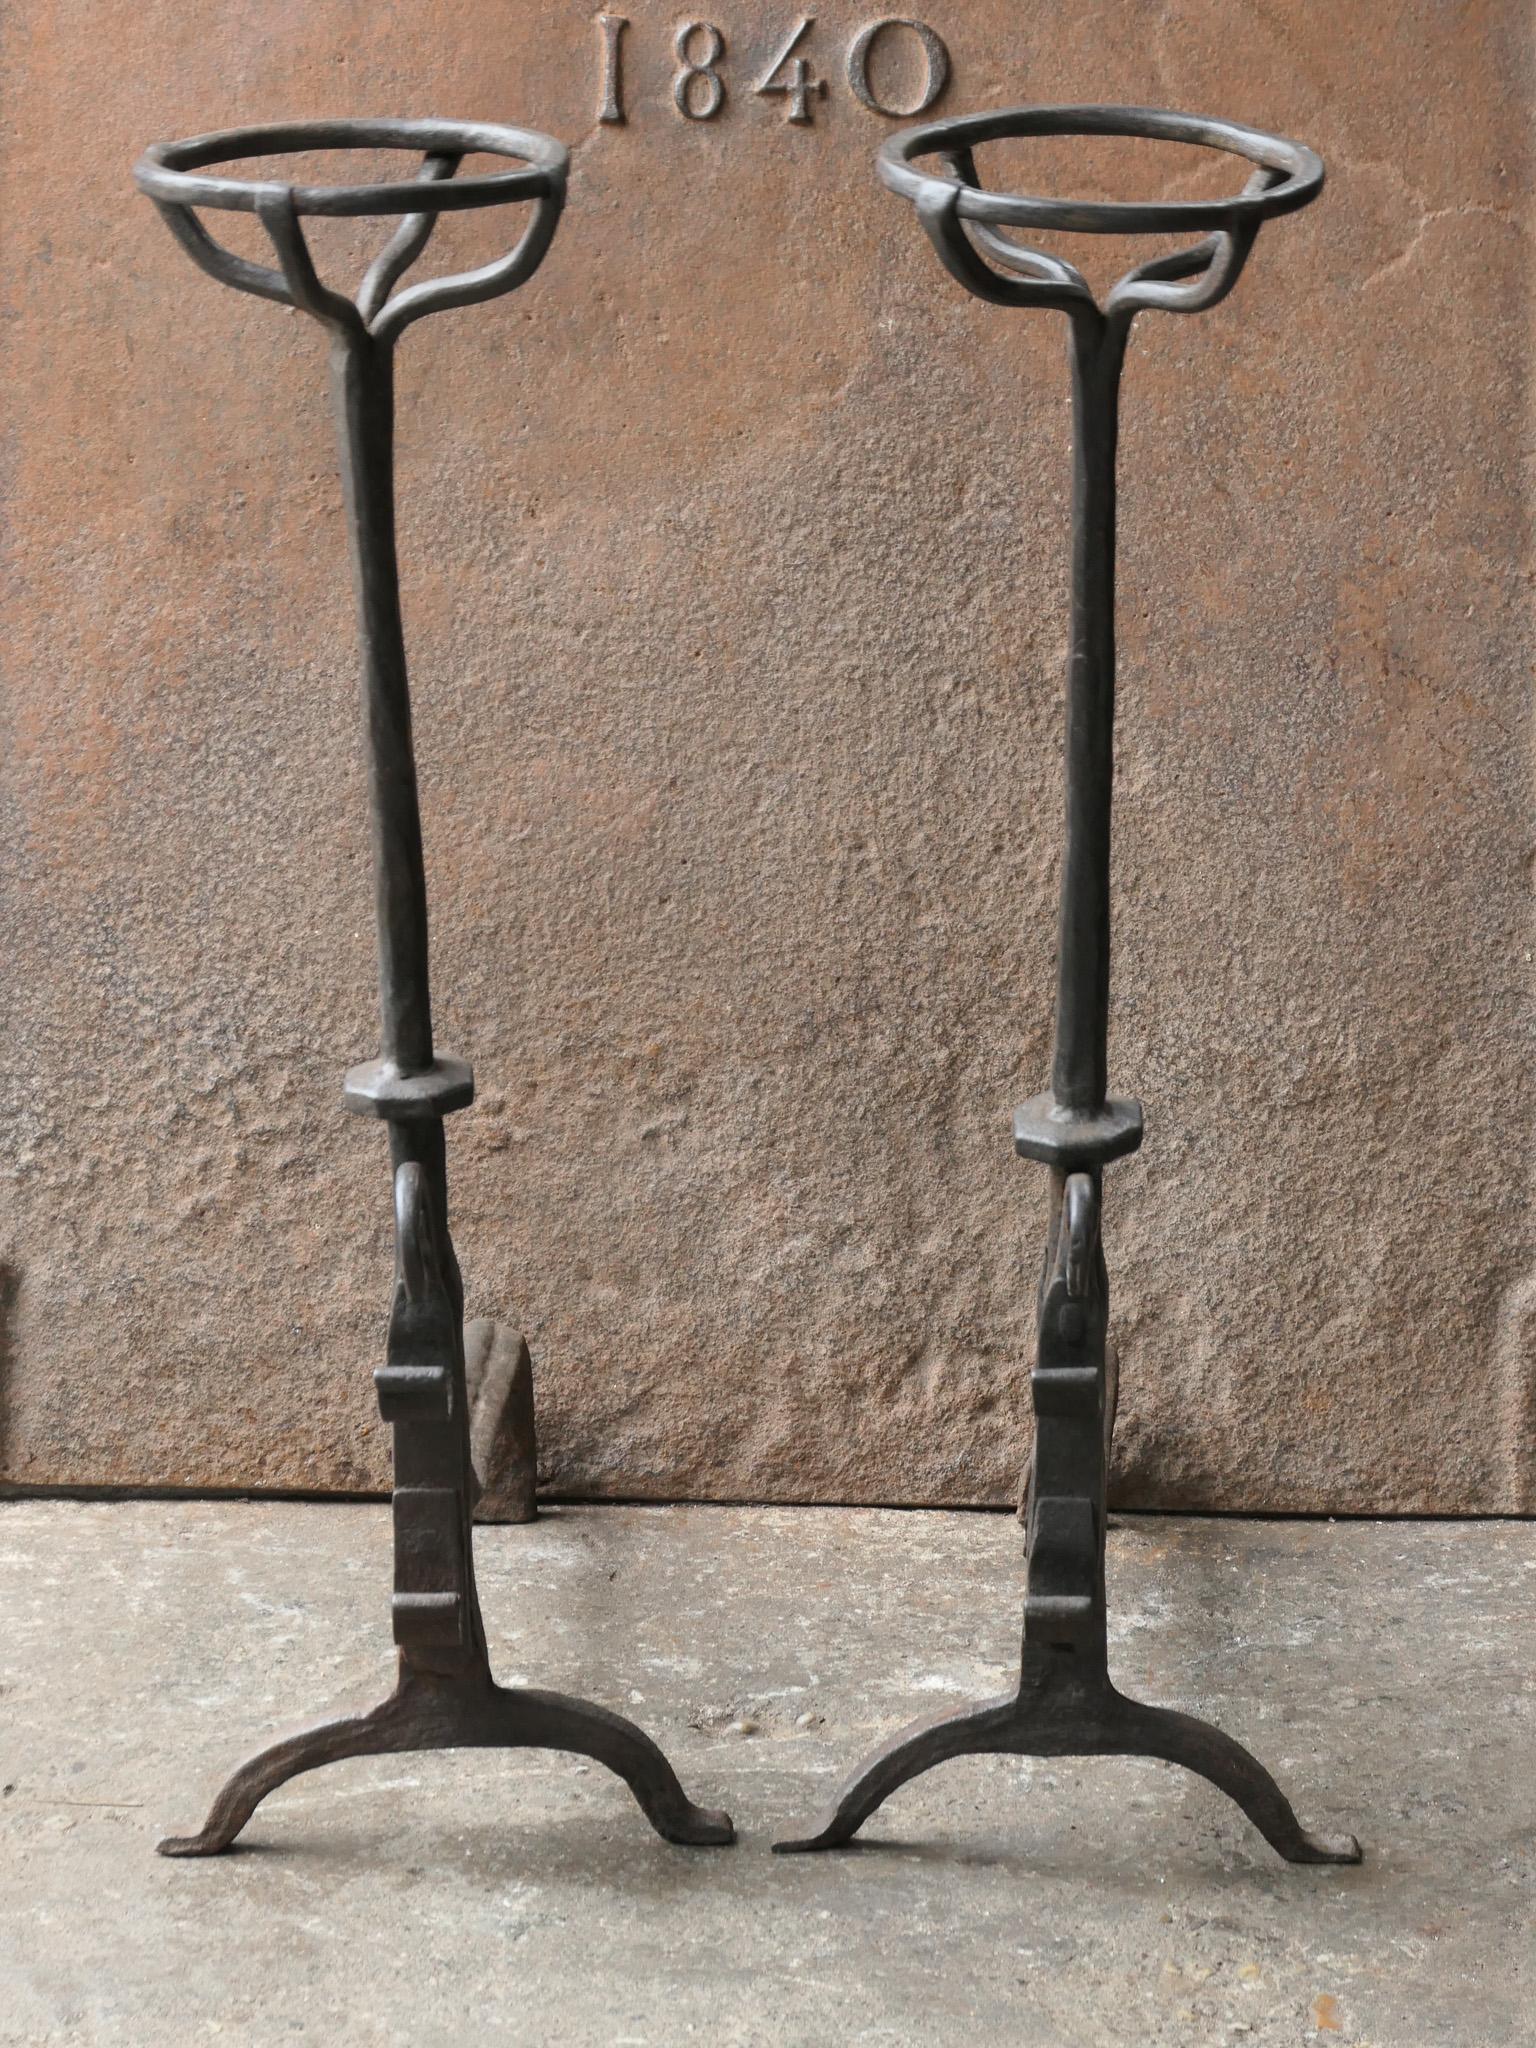 17th century French gothic andirons - fire dogs made of wrought iron. These French andirons are called 'landiers' in France. This dates from the times the andirons were the main cooking equipment in the house. They had spit hooks to grill meat or